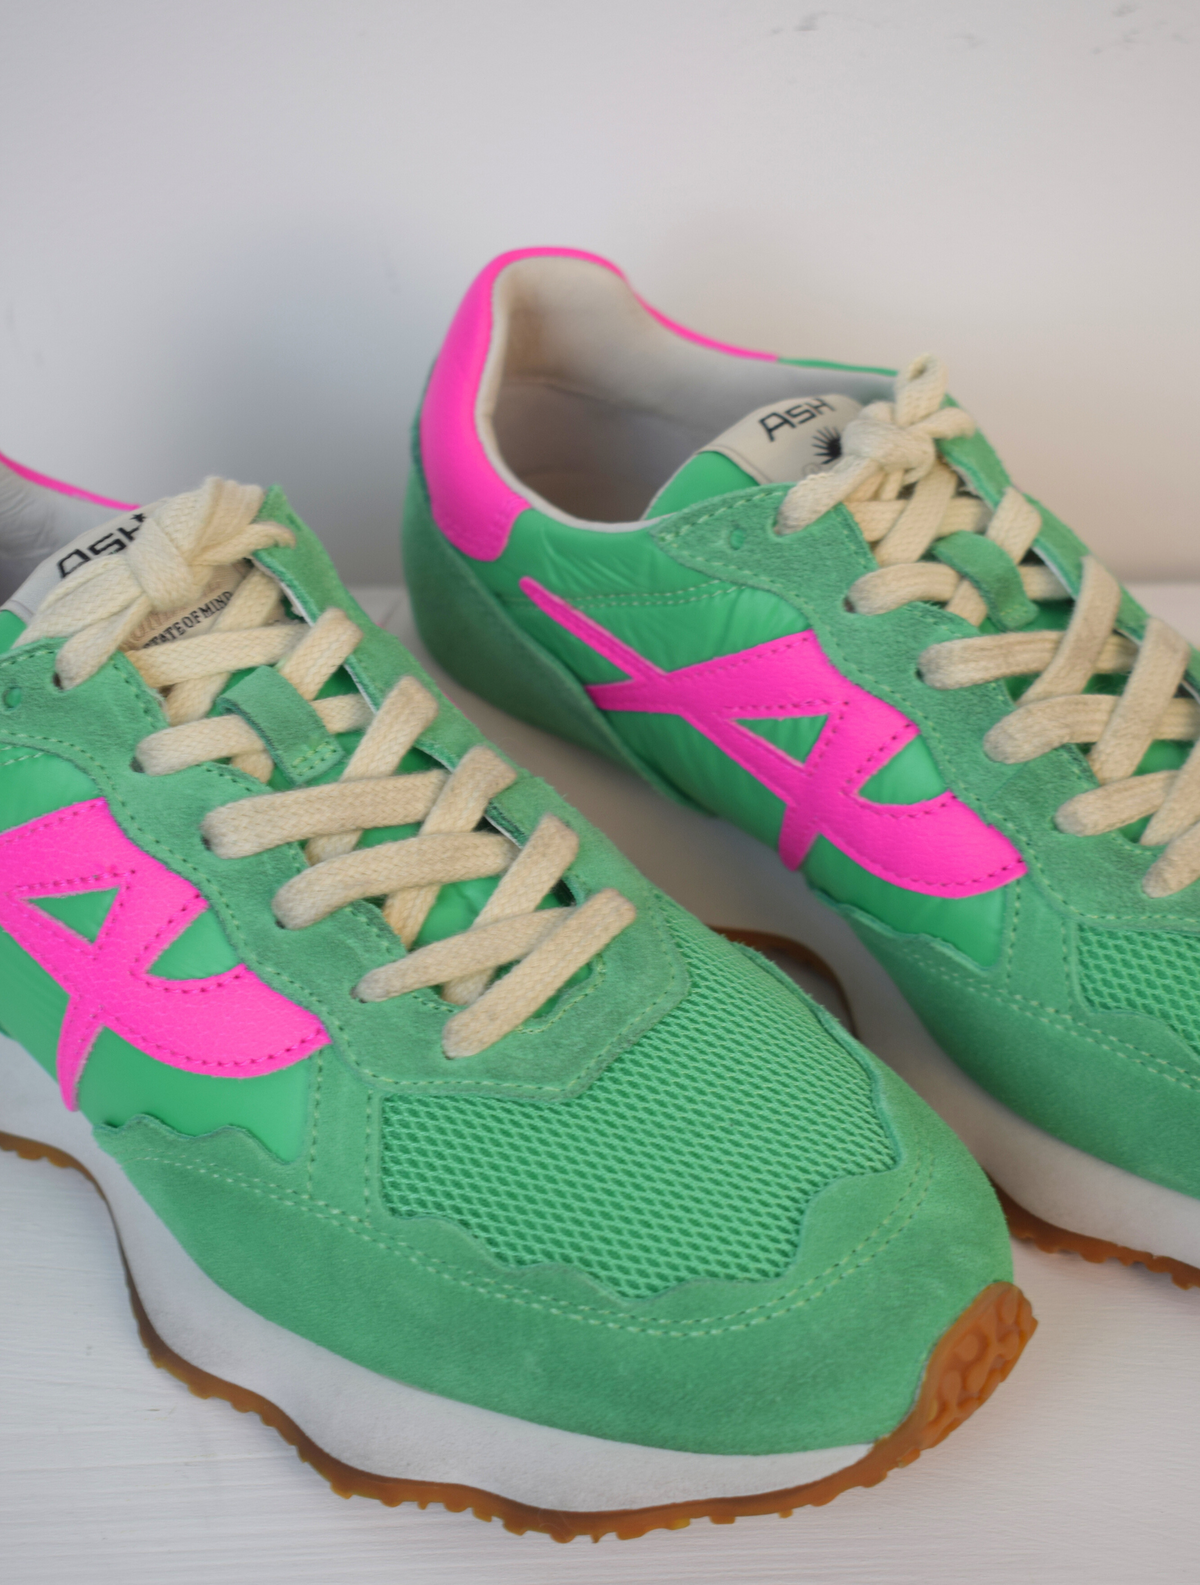 Green trainer with pink A on side and pink patch on back of heel 